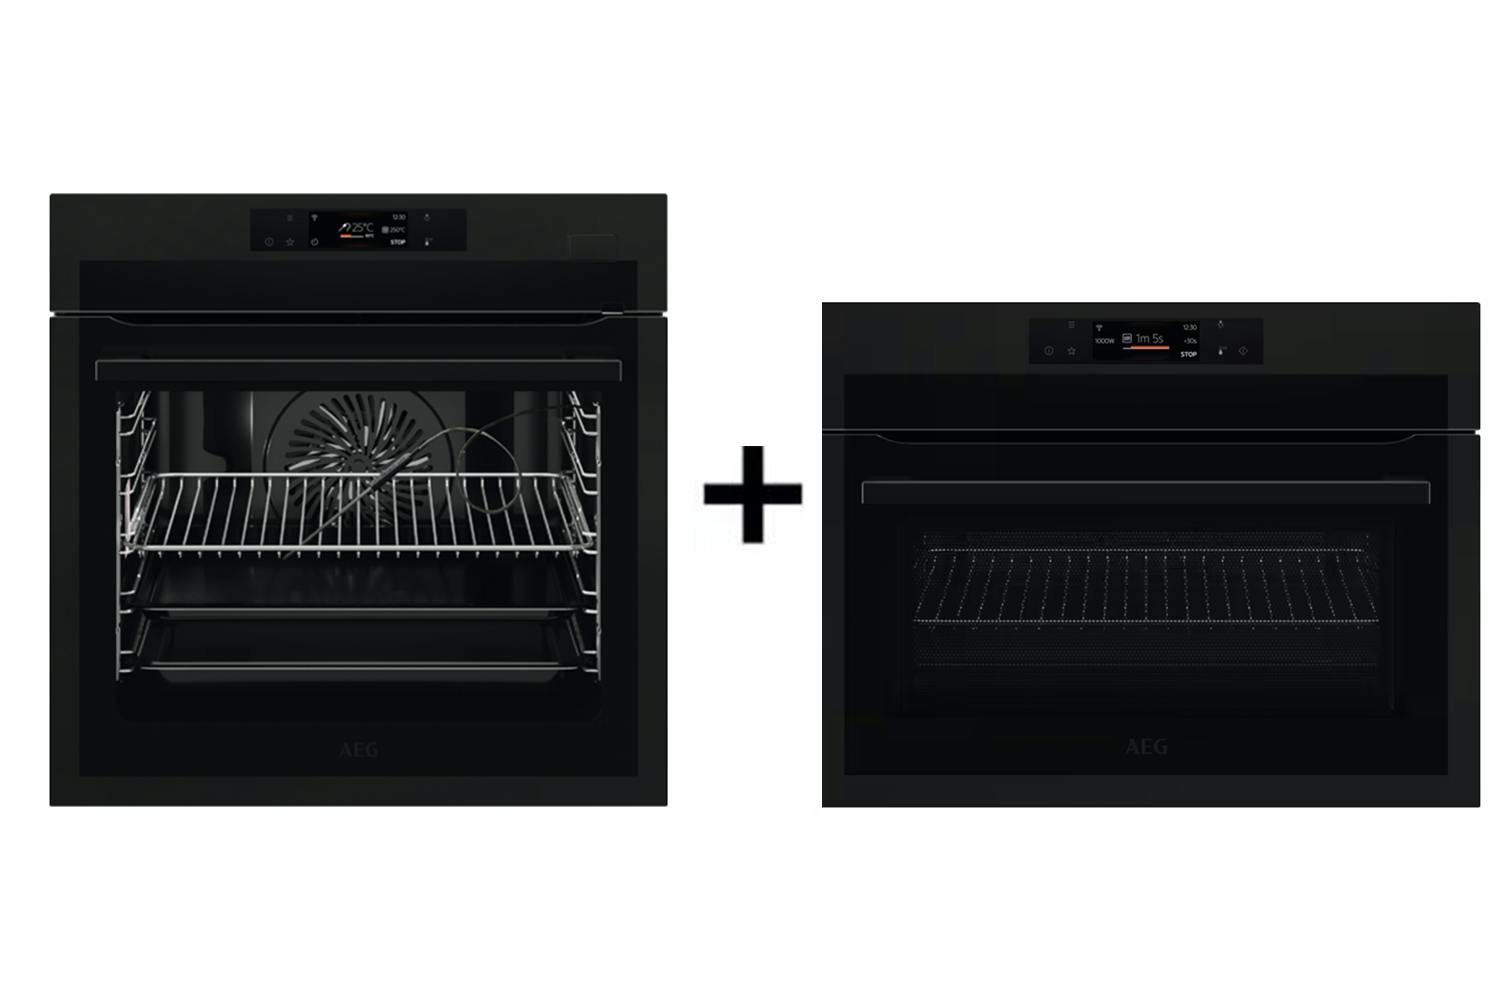 AEG 7000 Series Built-in Single Steam Oven & AEG 8000 Series Built-in Single Integrated CombiQuick Microwave Oven Bundle